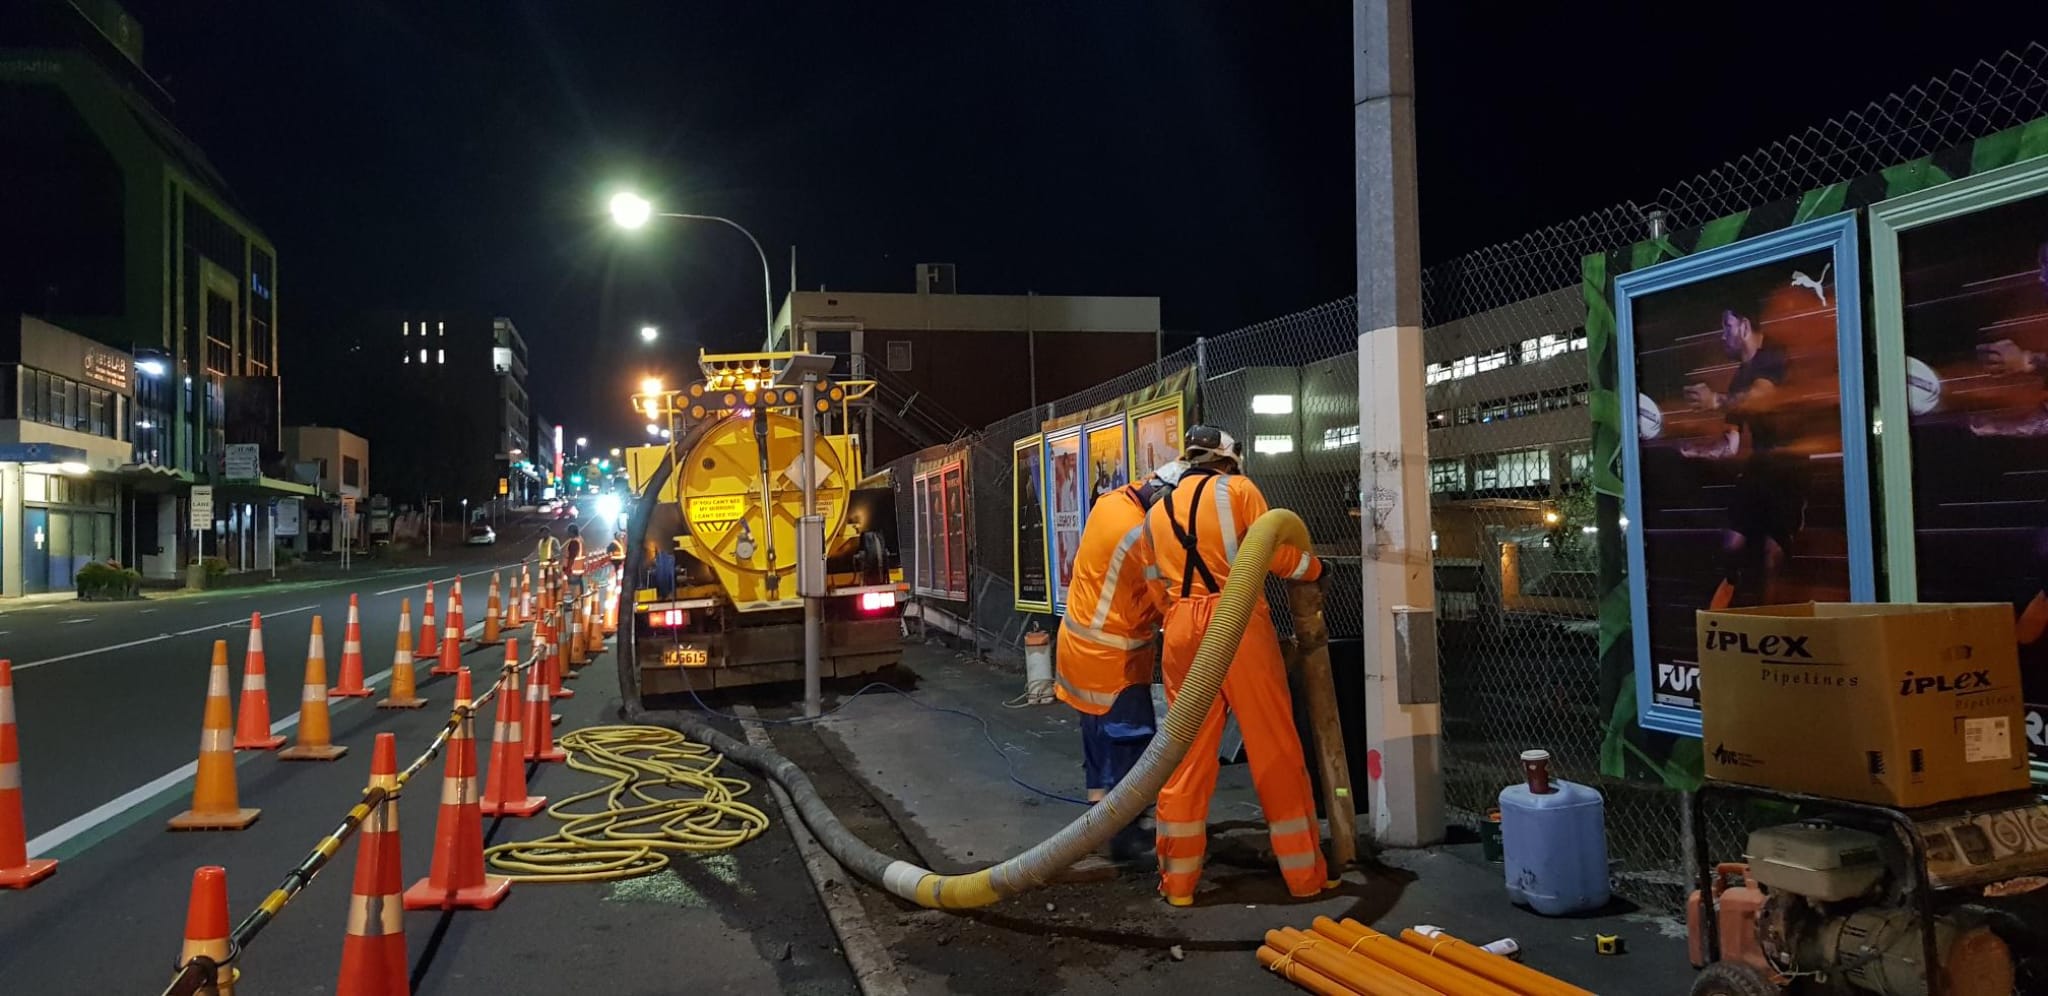 Night time pipe excavation by Hydro Excavators Vac U Digga providing hydroblasting, hydro digging and hydrovacing based in Christchurch NZ